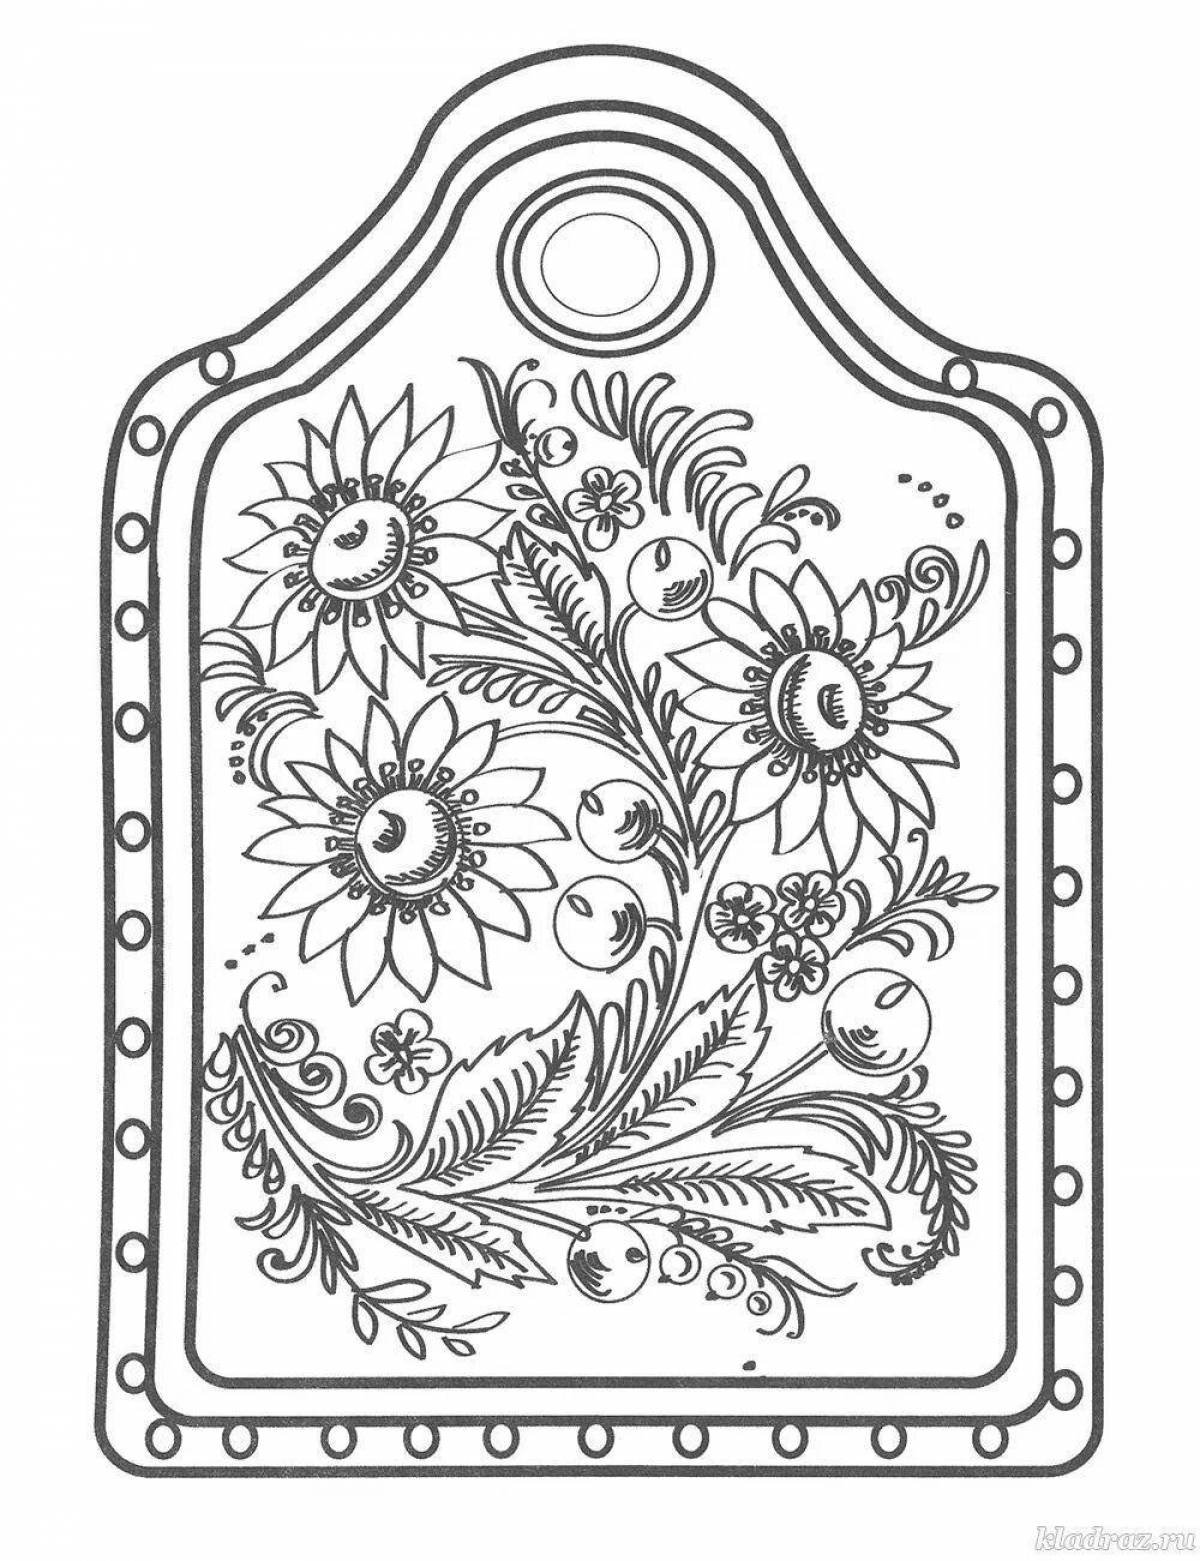 Chopping board color-explosion coloring page for kids